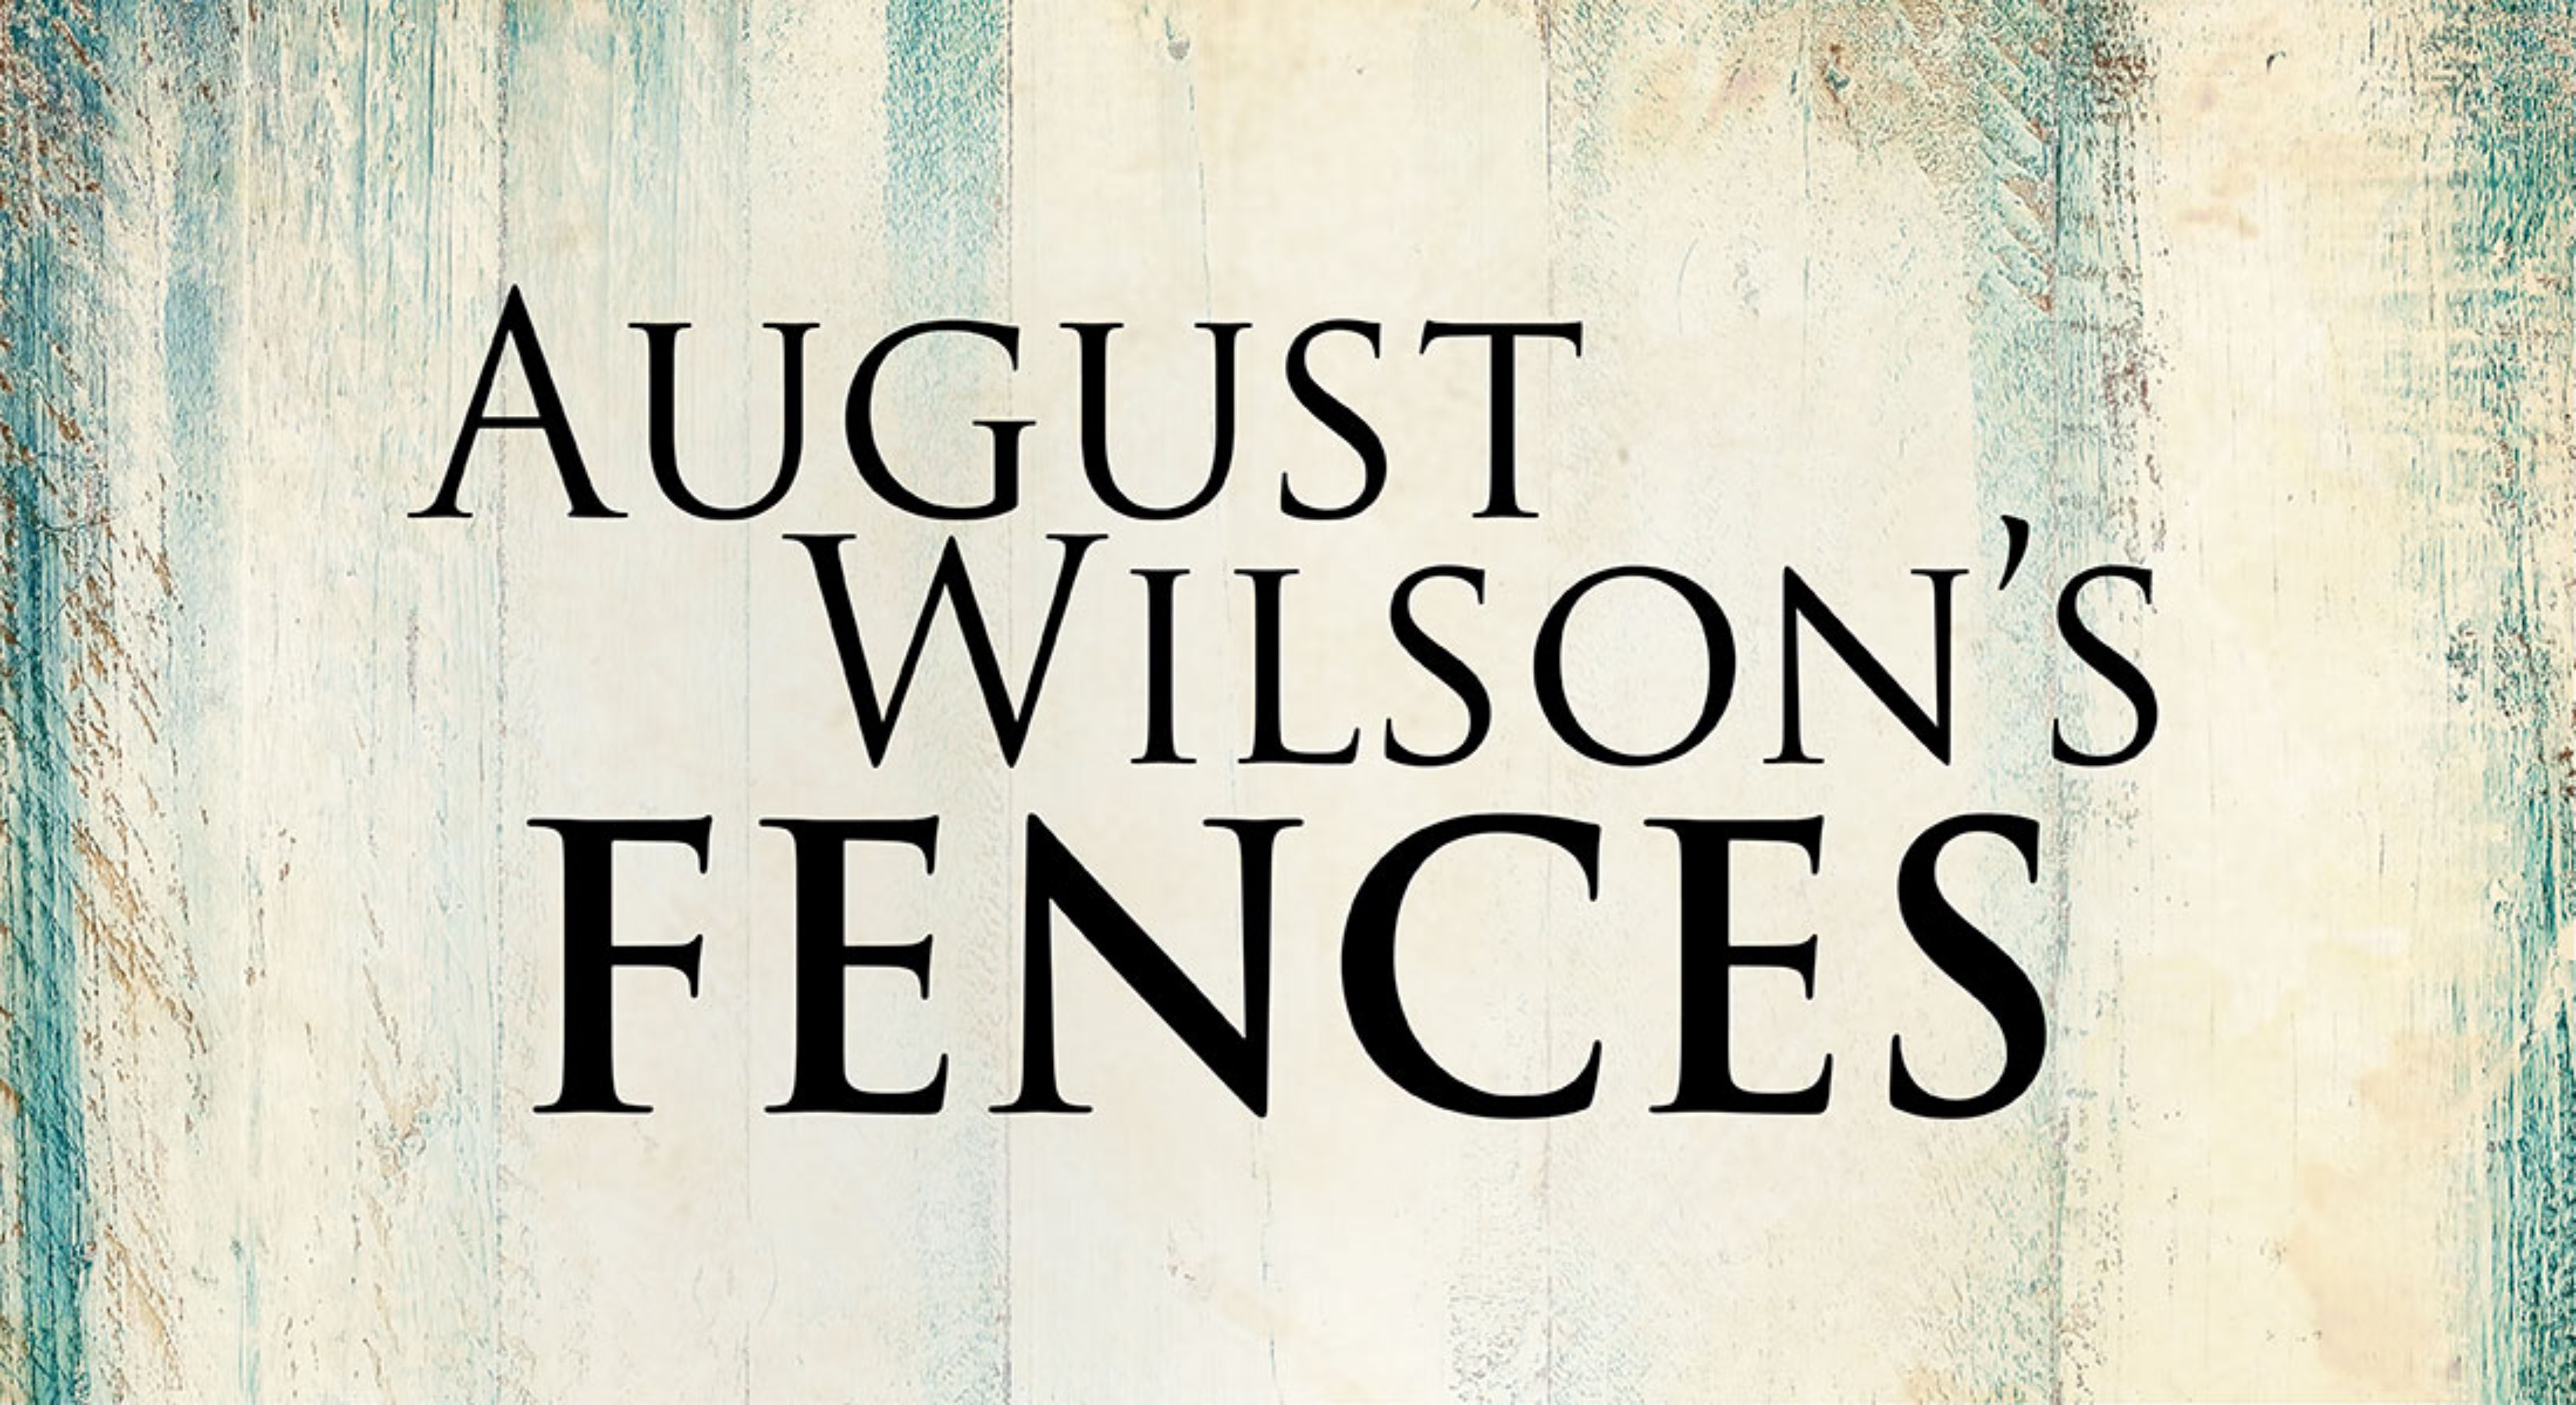 Logotext for August Wilson's "Fences" at historic Ford's Theatre. Link to get tickets.